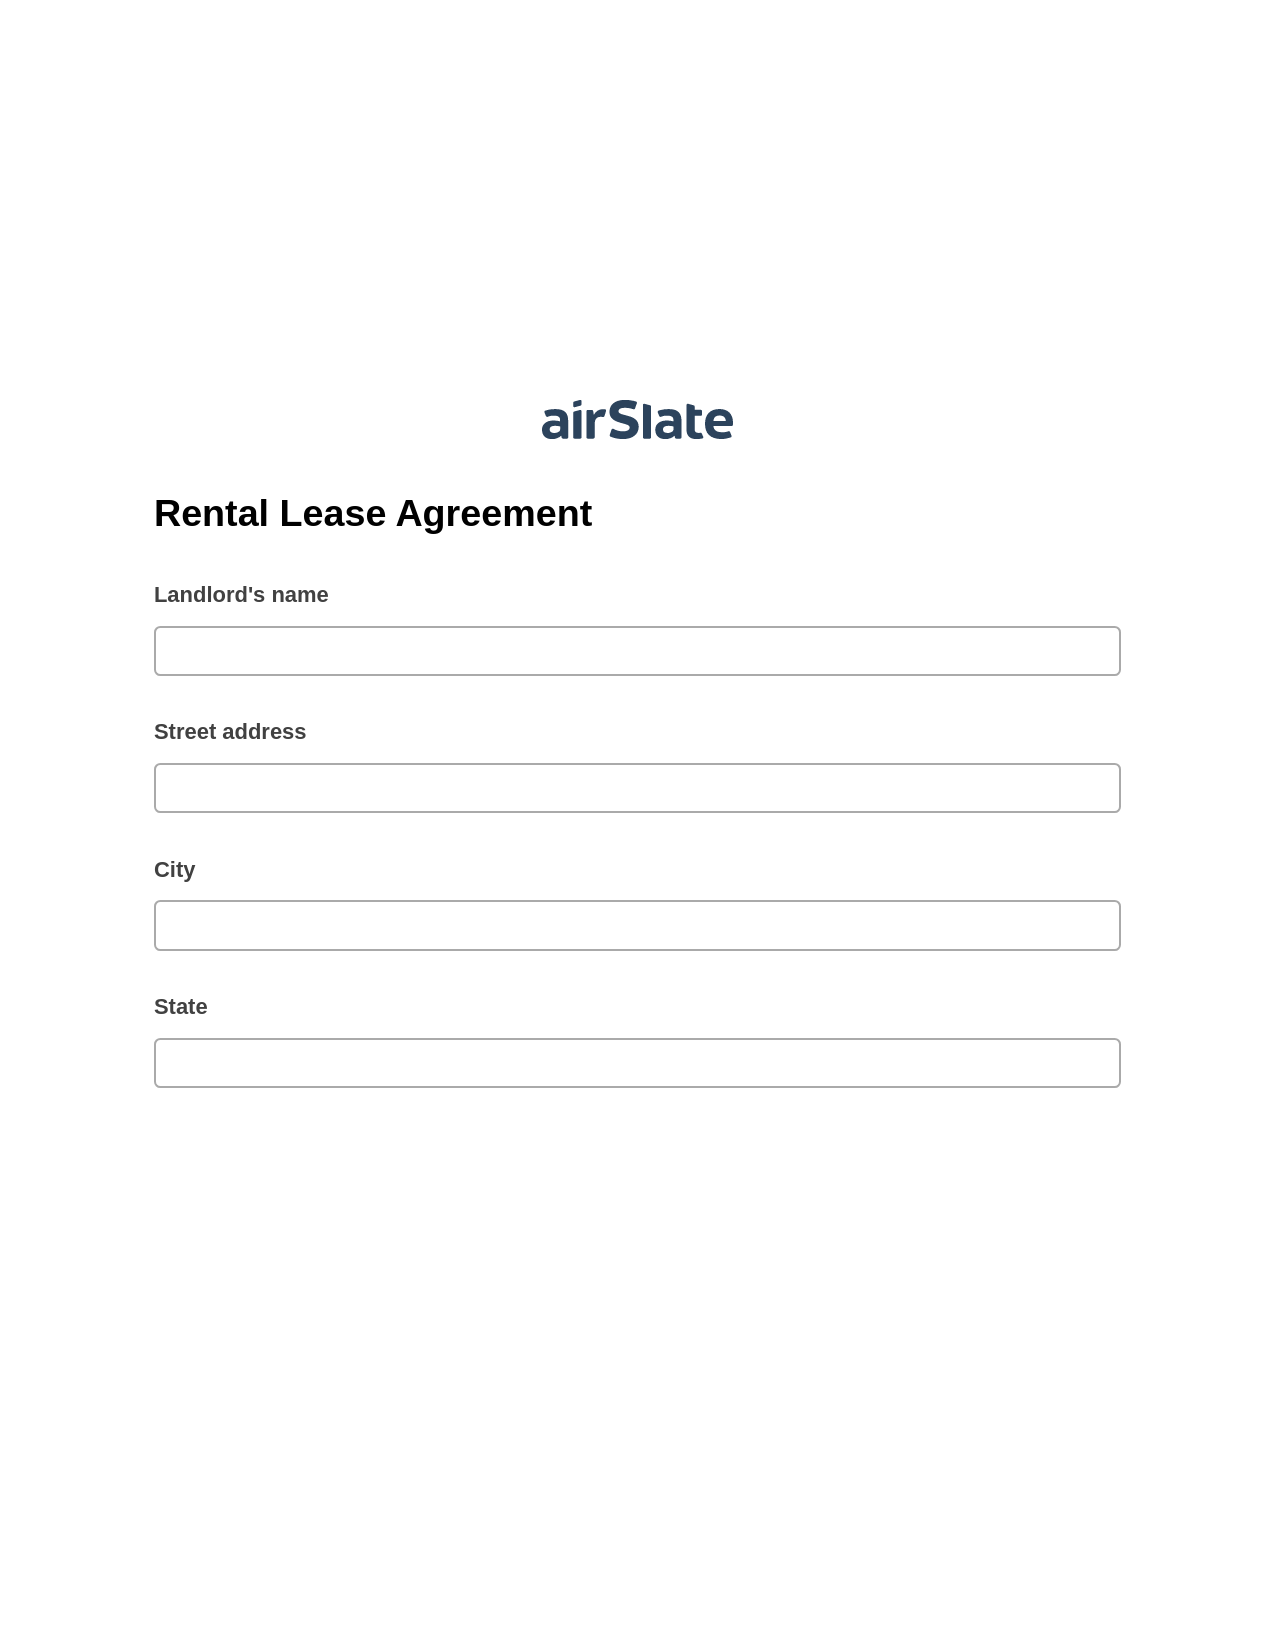 Rental Lease Agreement Pre-fill Dropdown from Airtable, Email Notification Bot, Google Drive Bot